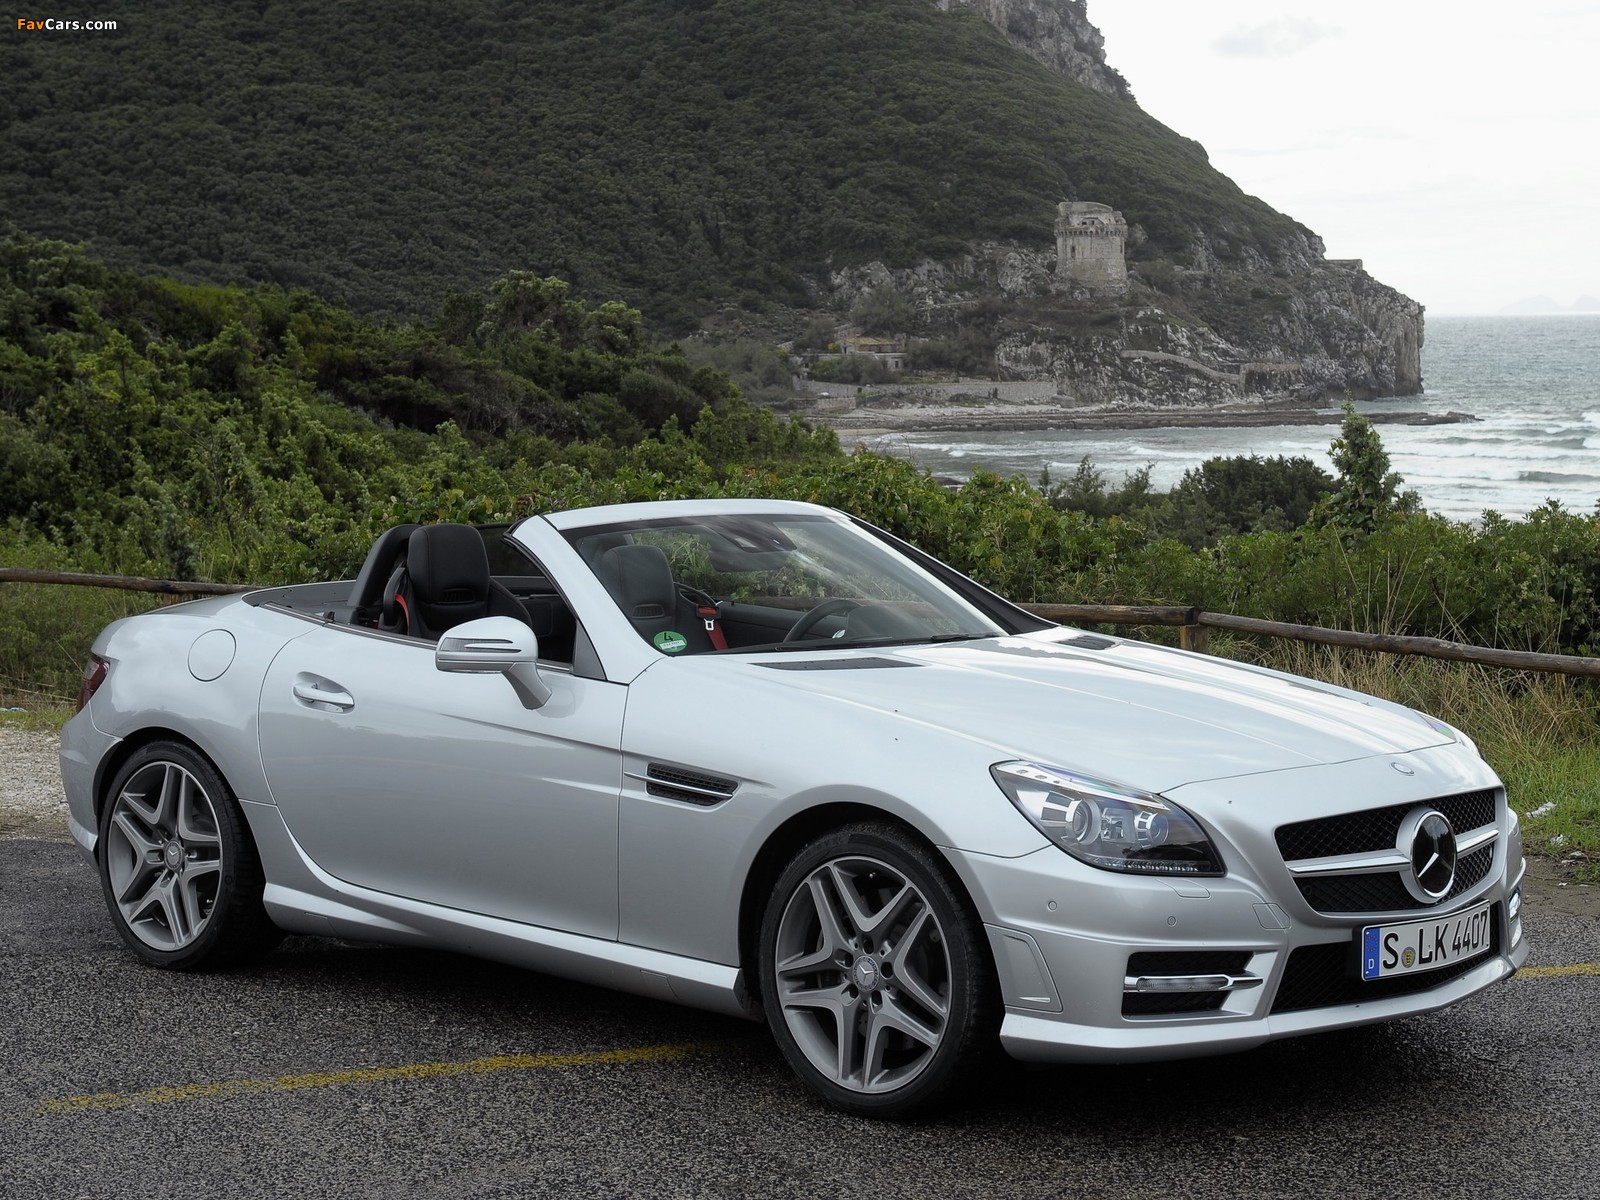 Mercedes-Benz SLK 250 CDI AMG Sports Package (R172) 2011 images (1600 x 1200)